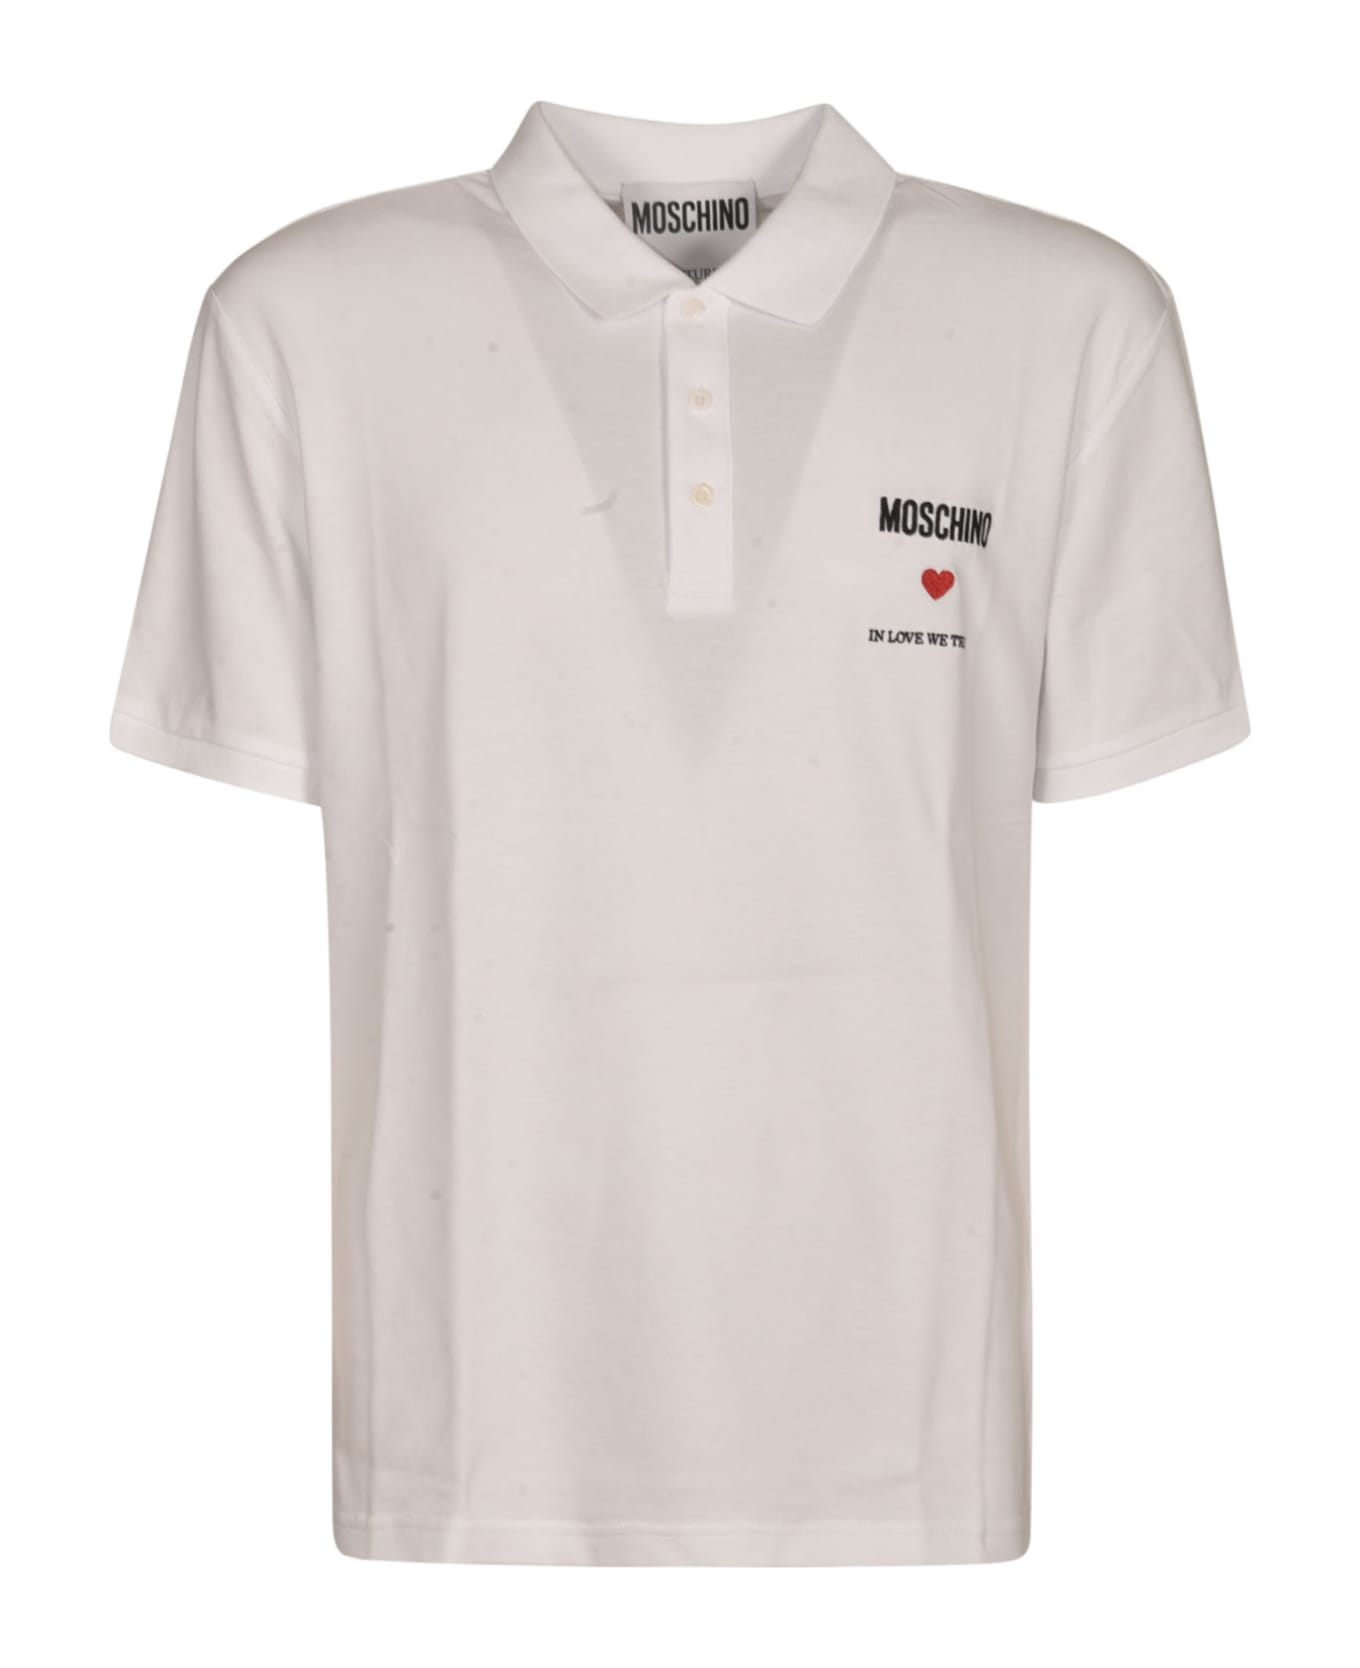 Moschino In Love We Trust Polo Shirt - White シャツ